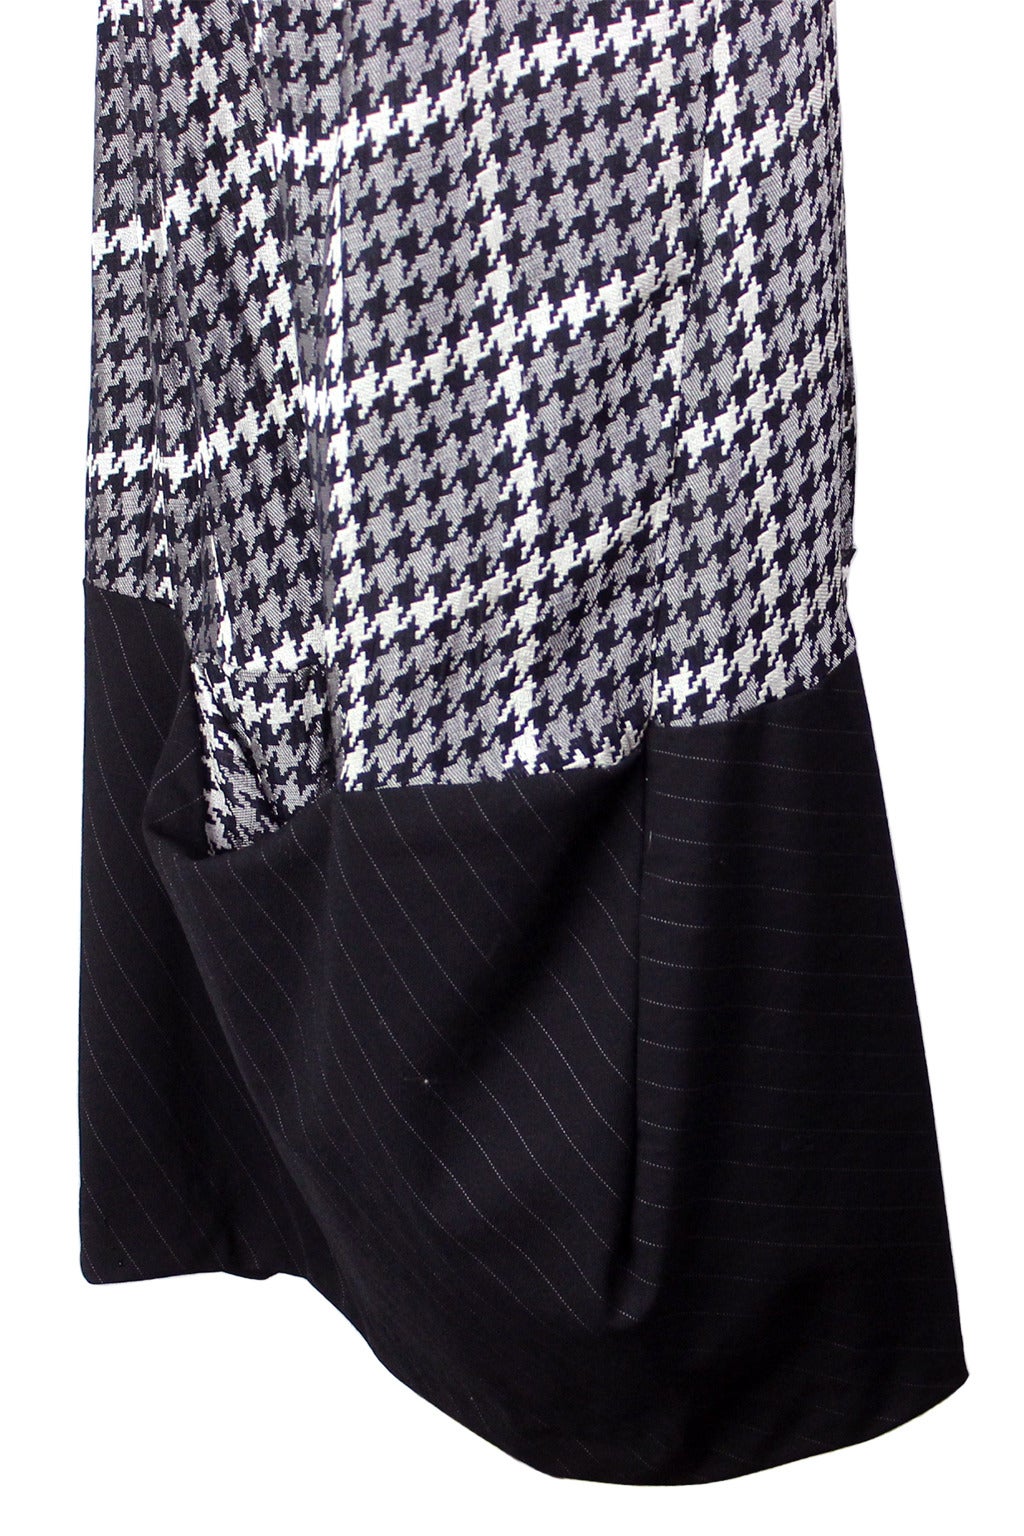 Comme des Garcons Asymmetrical Houndstooth Dress 2